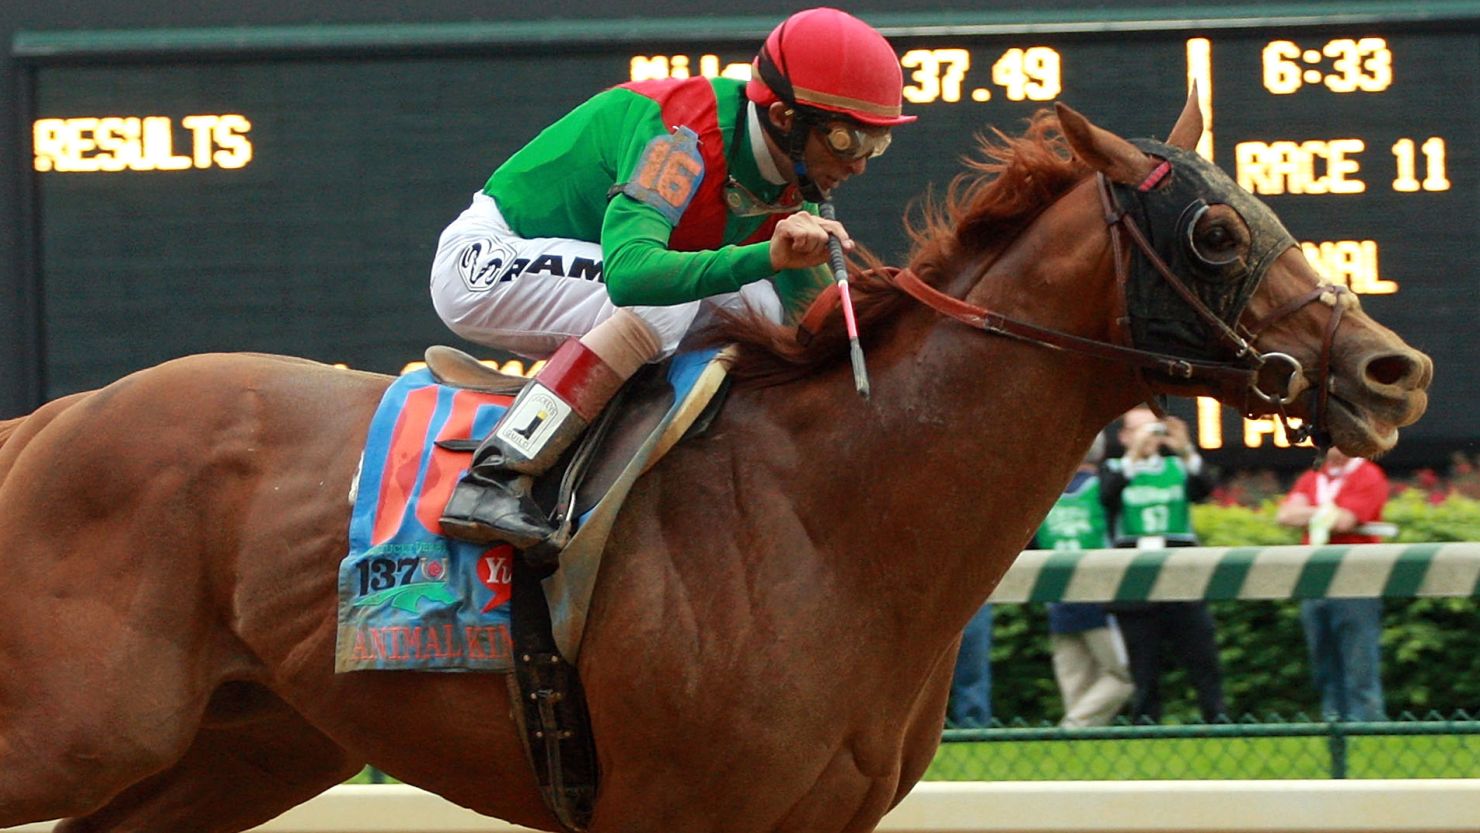 Animal Kingdom, seen here winning the Kentucky Derby in 2011, has won the the Dubai World Cup, world's richest horse race. 